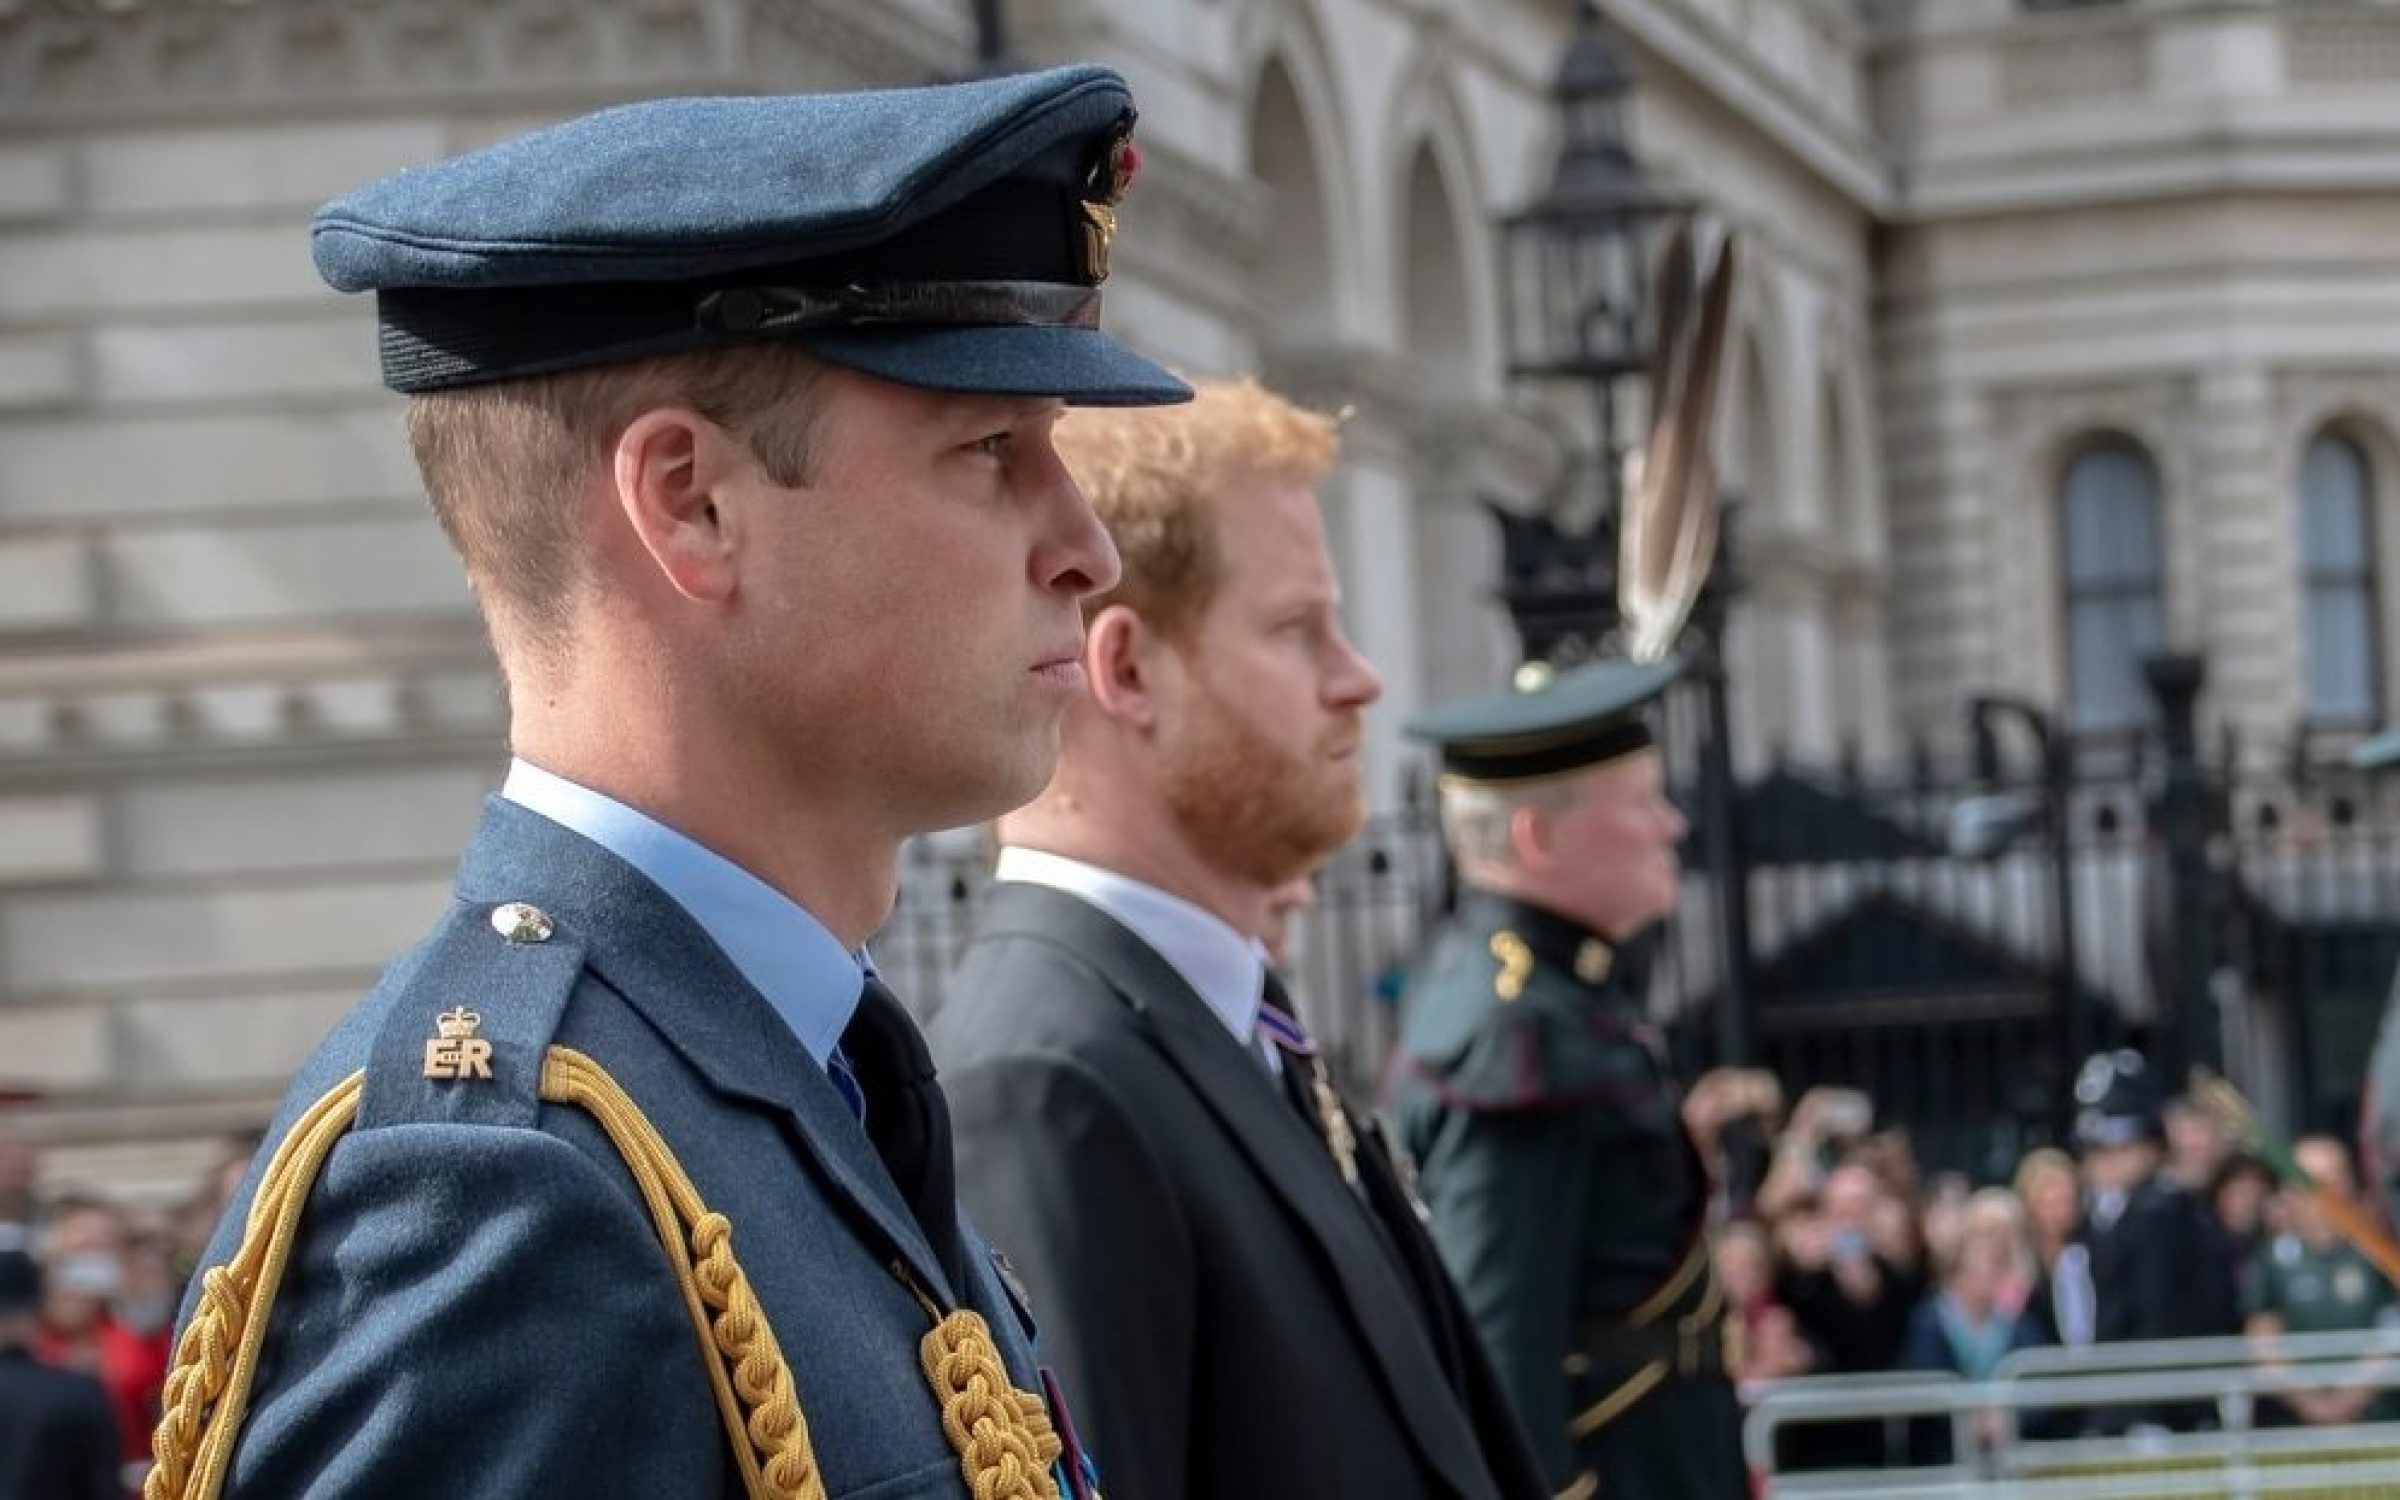 Prince Harry and Prince William at the state funeral of her majesty queen Elizabeth II